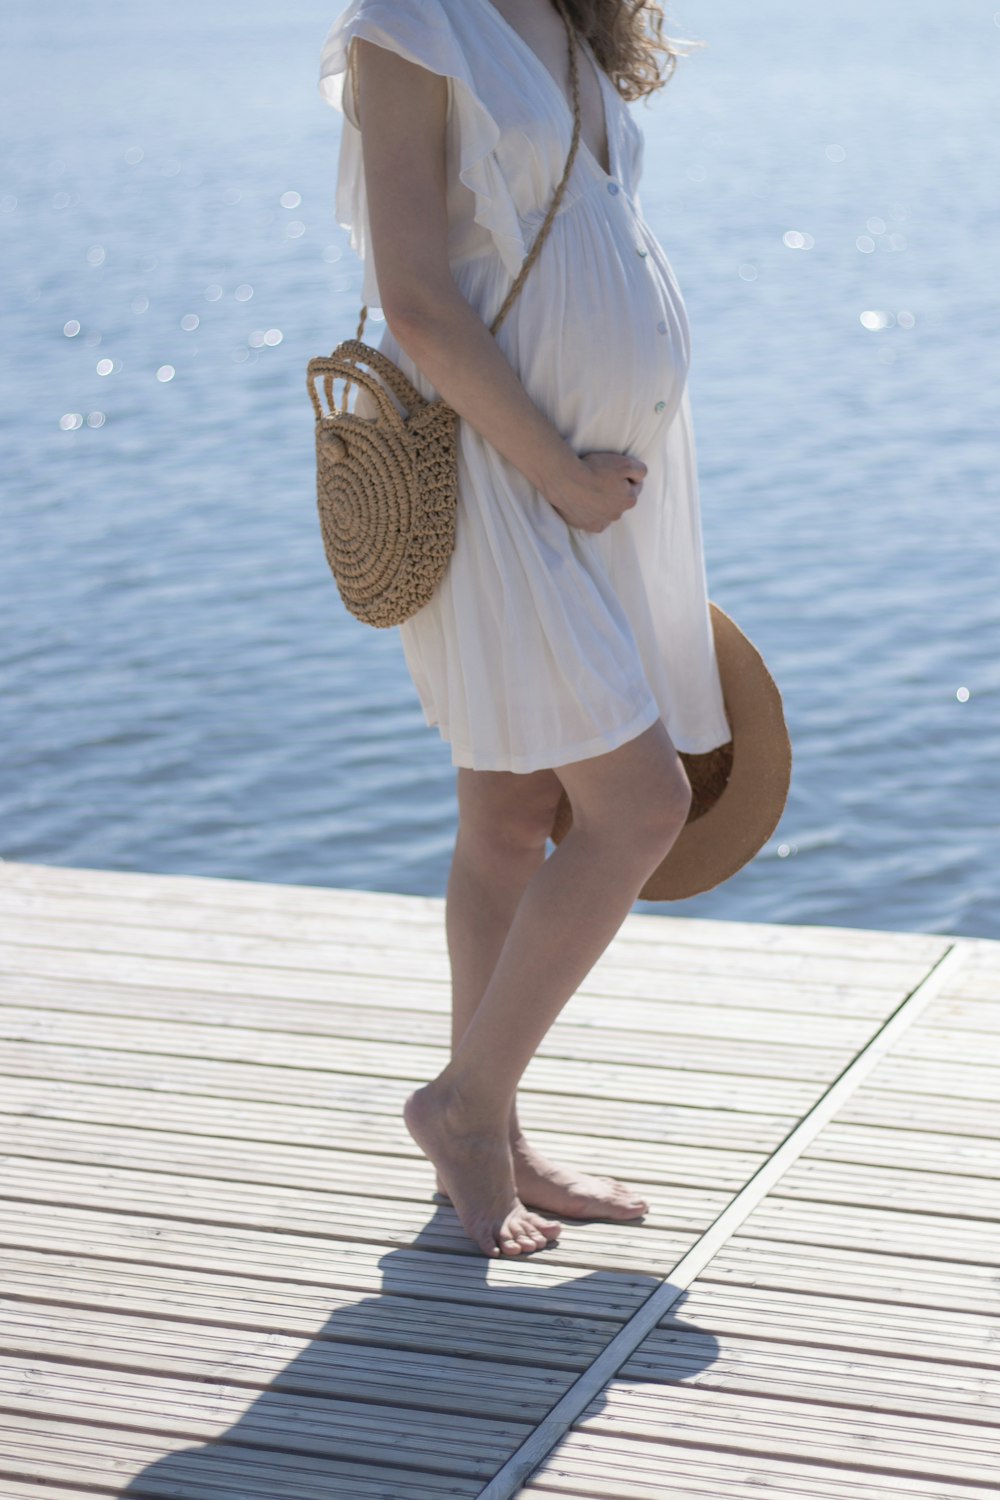 pregnant woman touching her belly and holding her hat standing on wooden dock during day